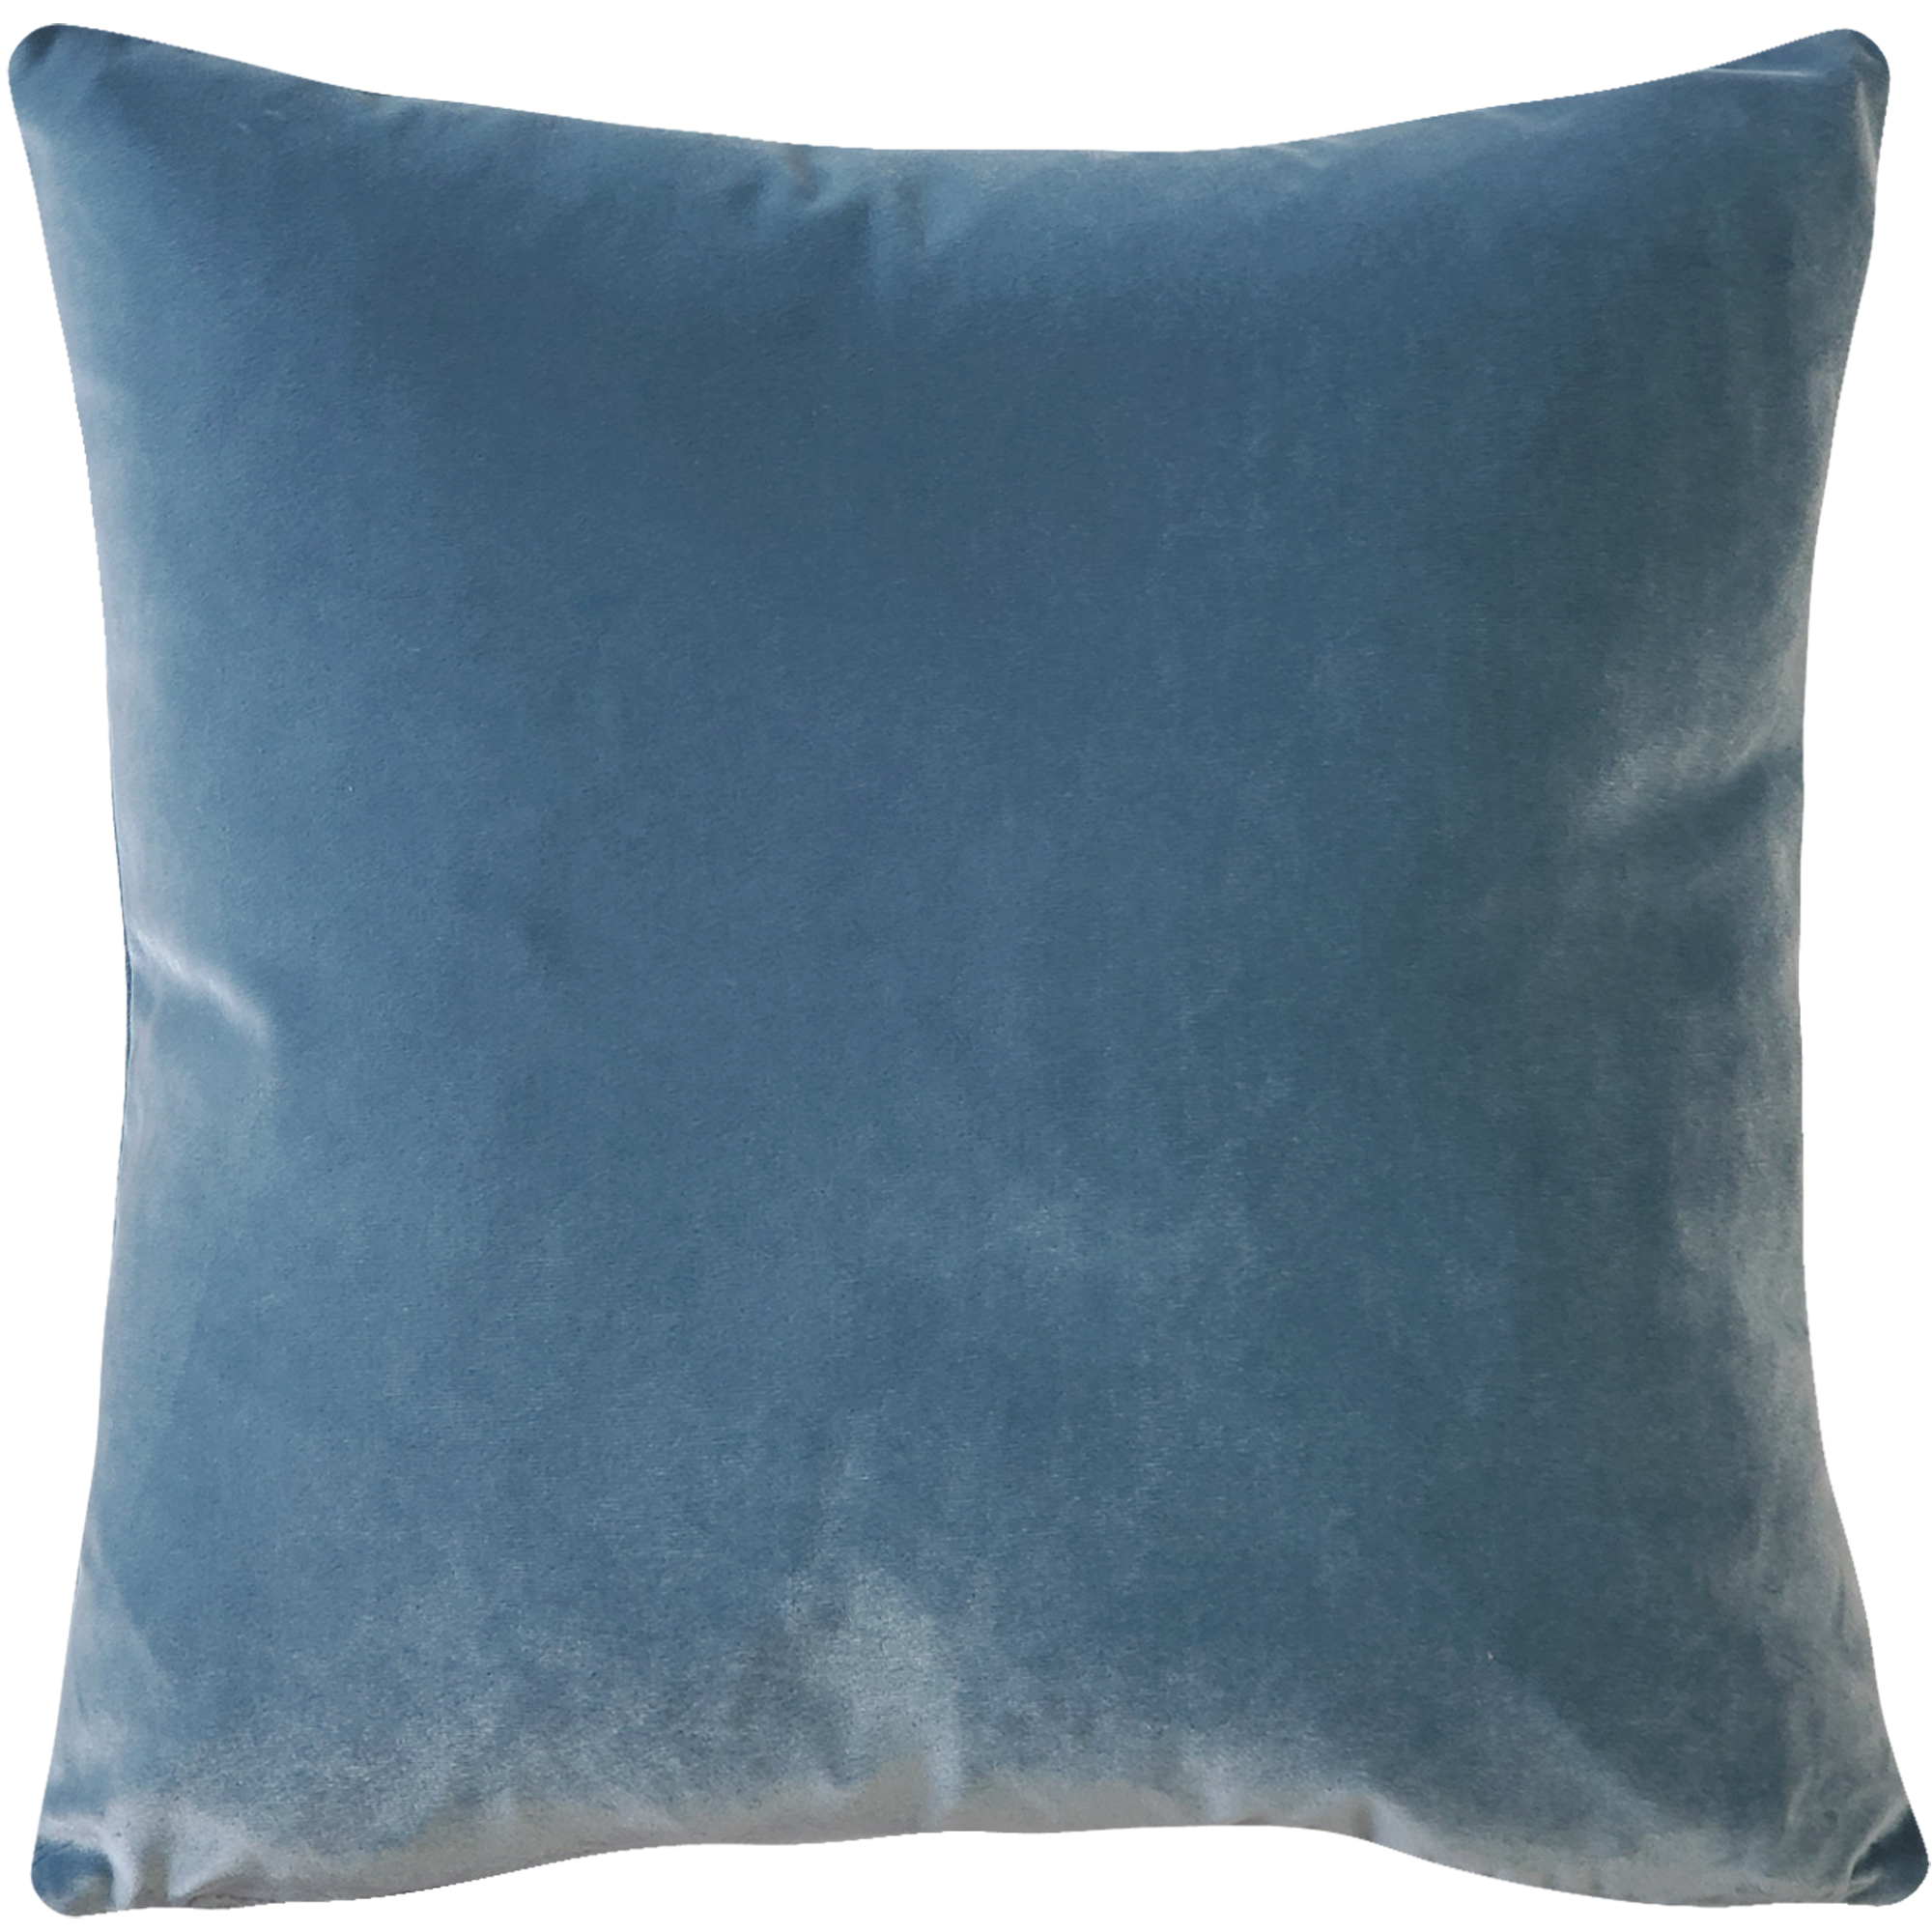 Throw Pillow Cotton Velvet Blue with Piped Pattern 18 Square